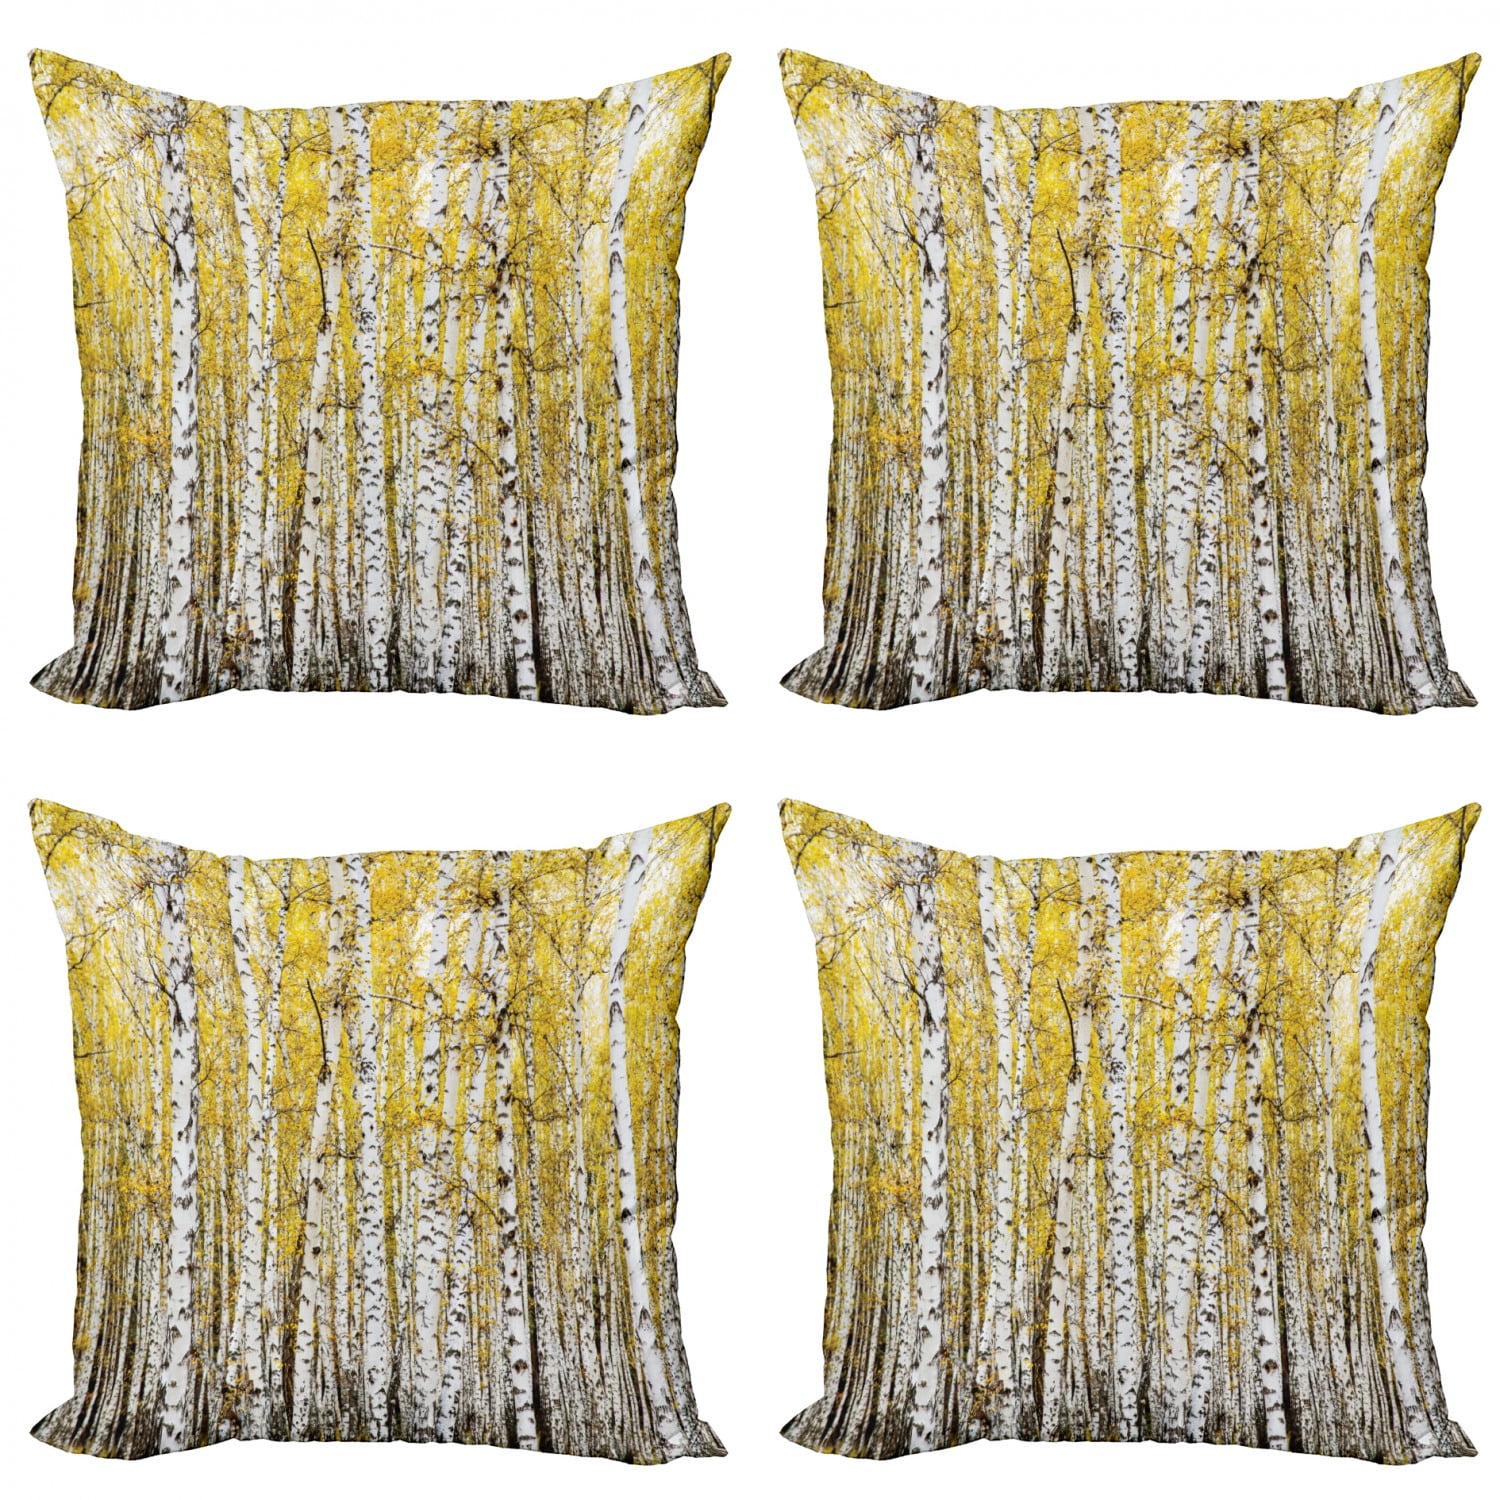 Decorative Square Accent Pillow Case 24 X 24 Inches Yellow Grey min_15752_24x24 Autumn Birch Forest Golden Yellow Leaves Woodland October Seasonal Nature Picture Ambesonne Forest Throw Pillow Cushion Cover 